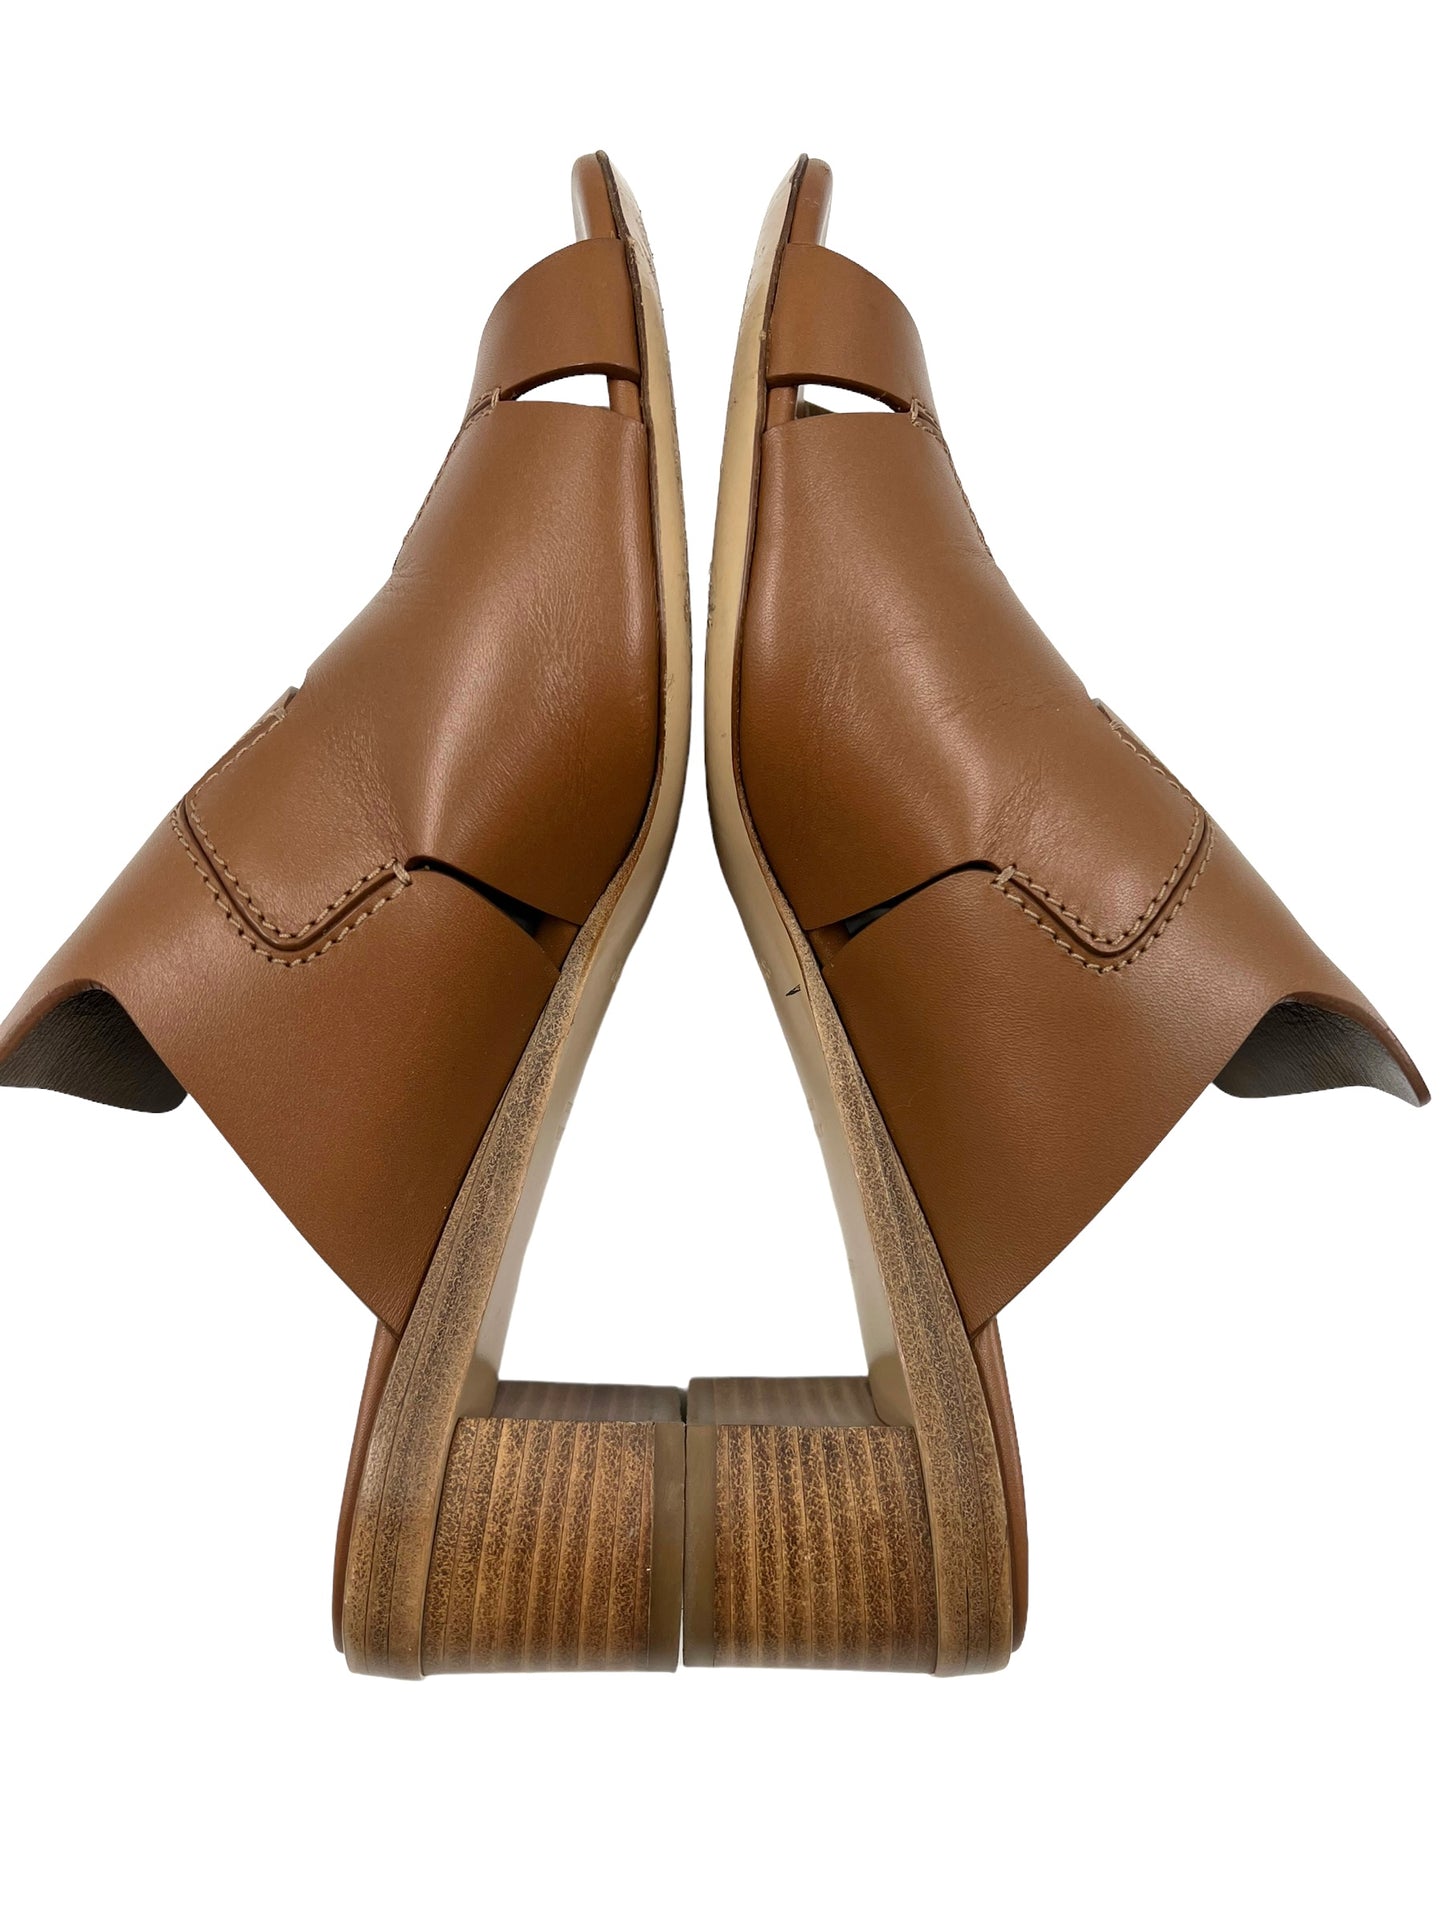 Hermes Tan Leather Size 39.5 'Right Mule' Sandals